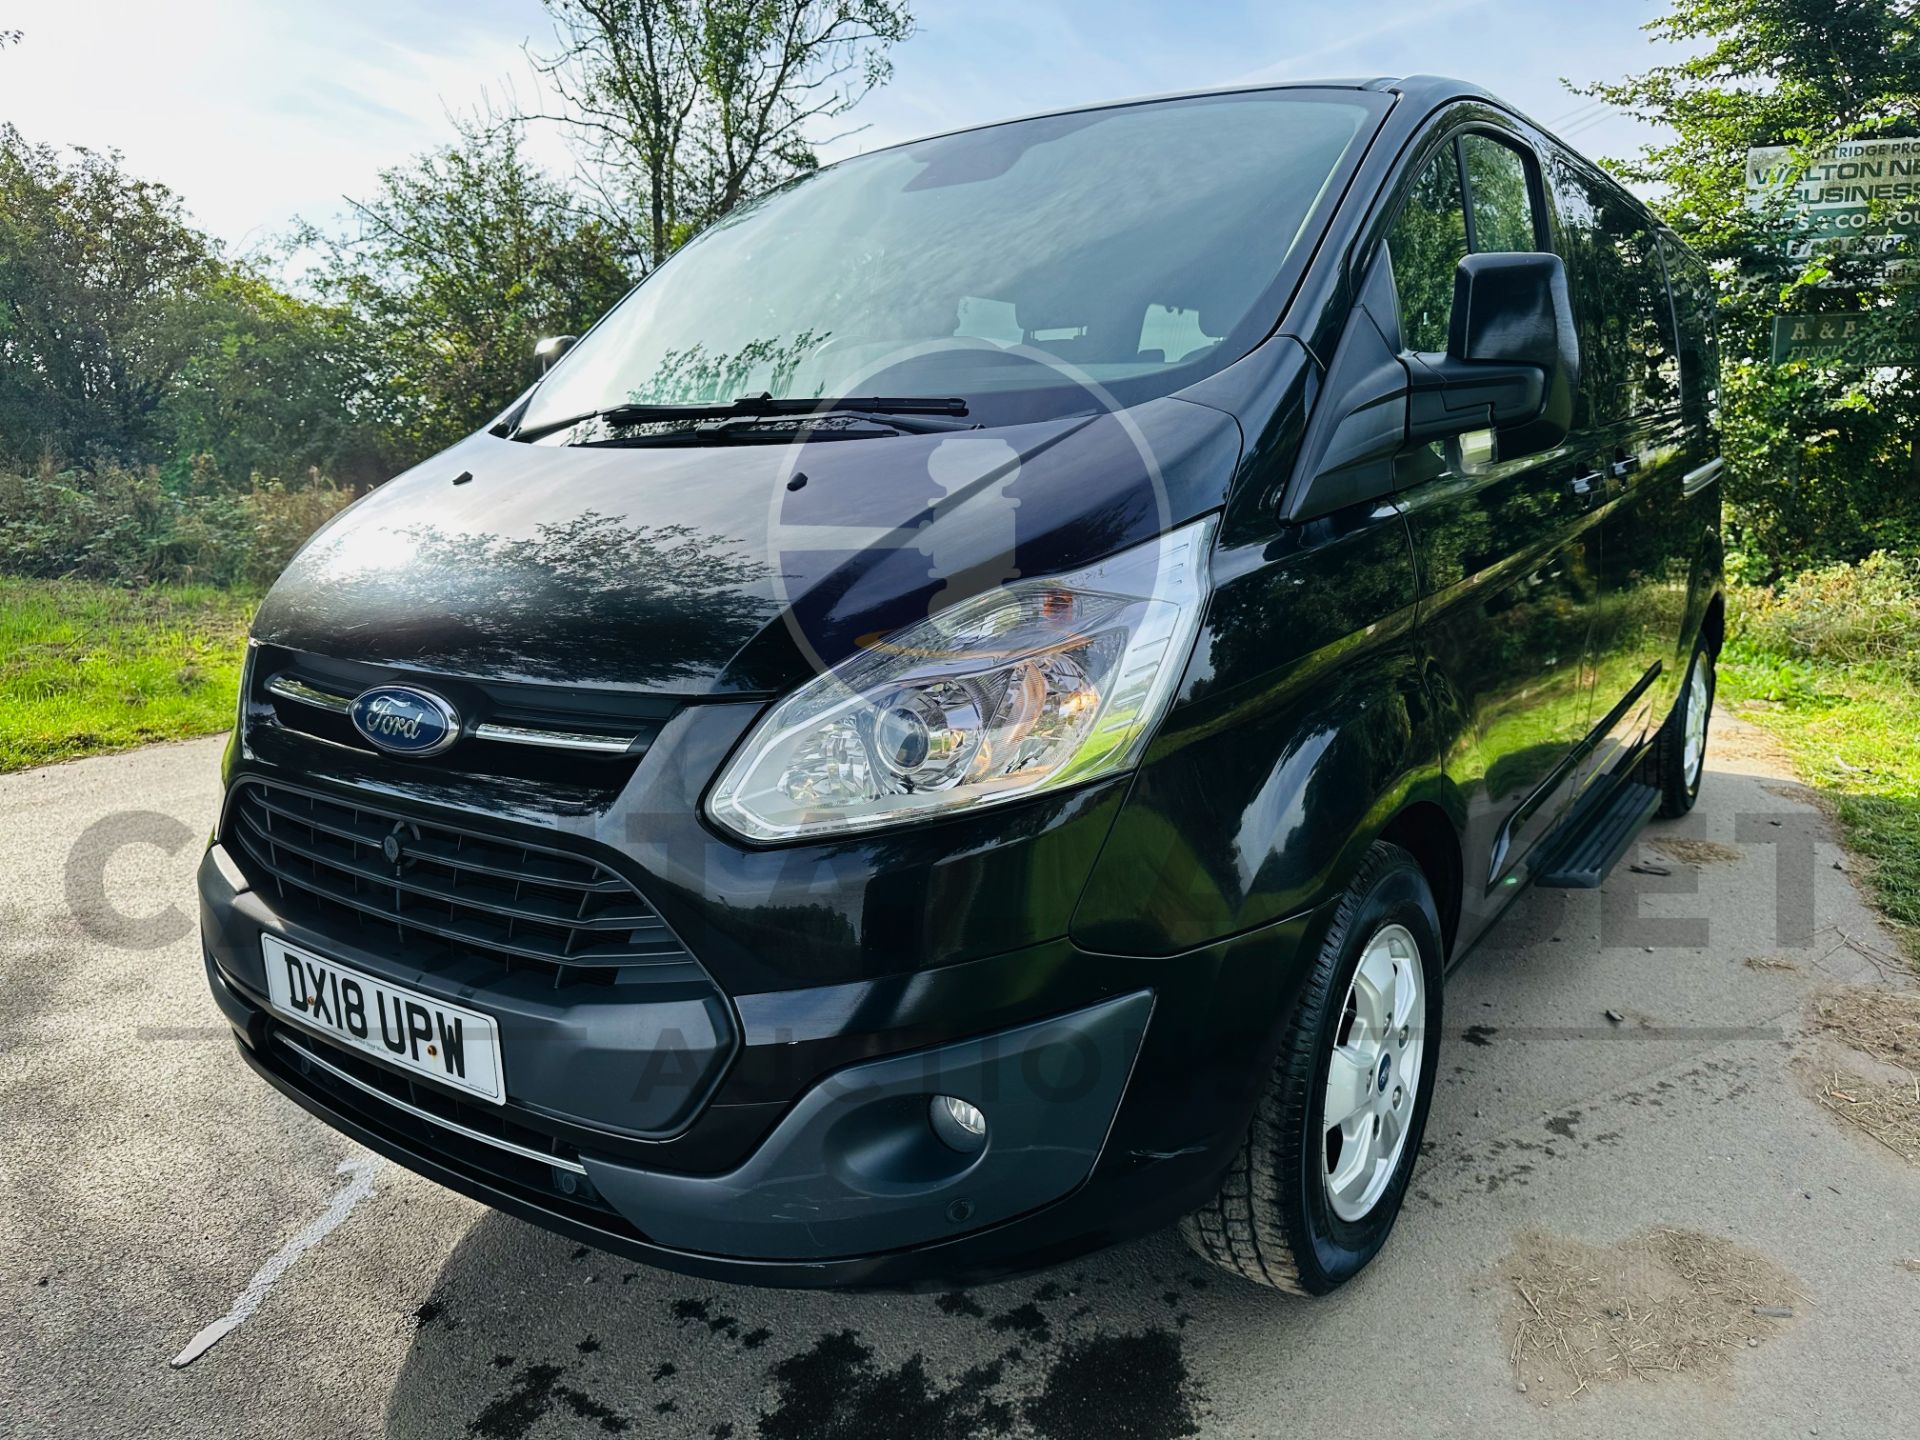 (On Sale) FORD TRANSIT TOURNEO CUSTOM *LWB 9 SEATER BUS* (2018 - EURO 6) 2.0 TDCI - AUTO (1 OWNER) - Image 5 of 42